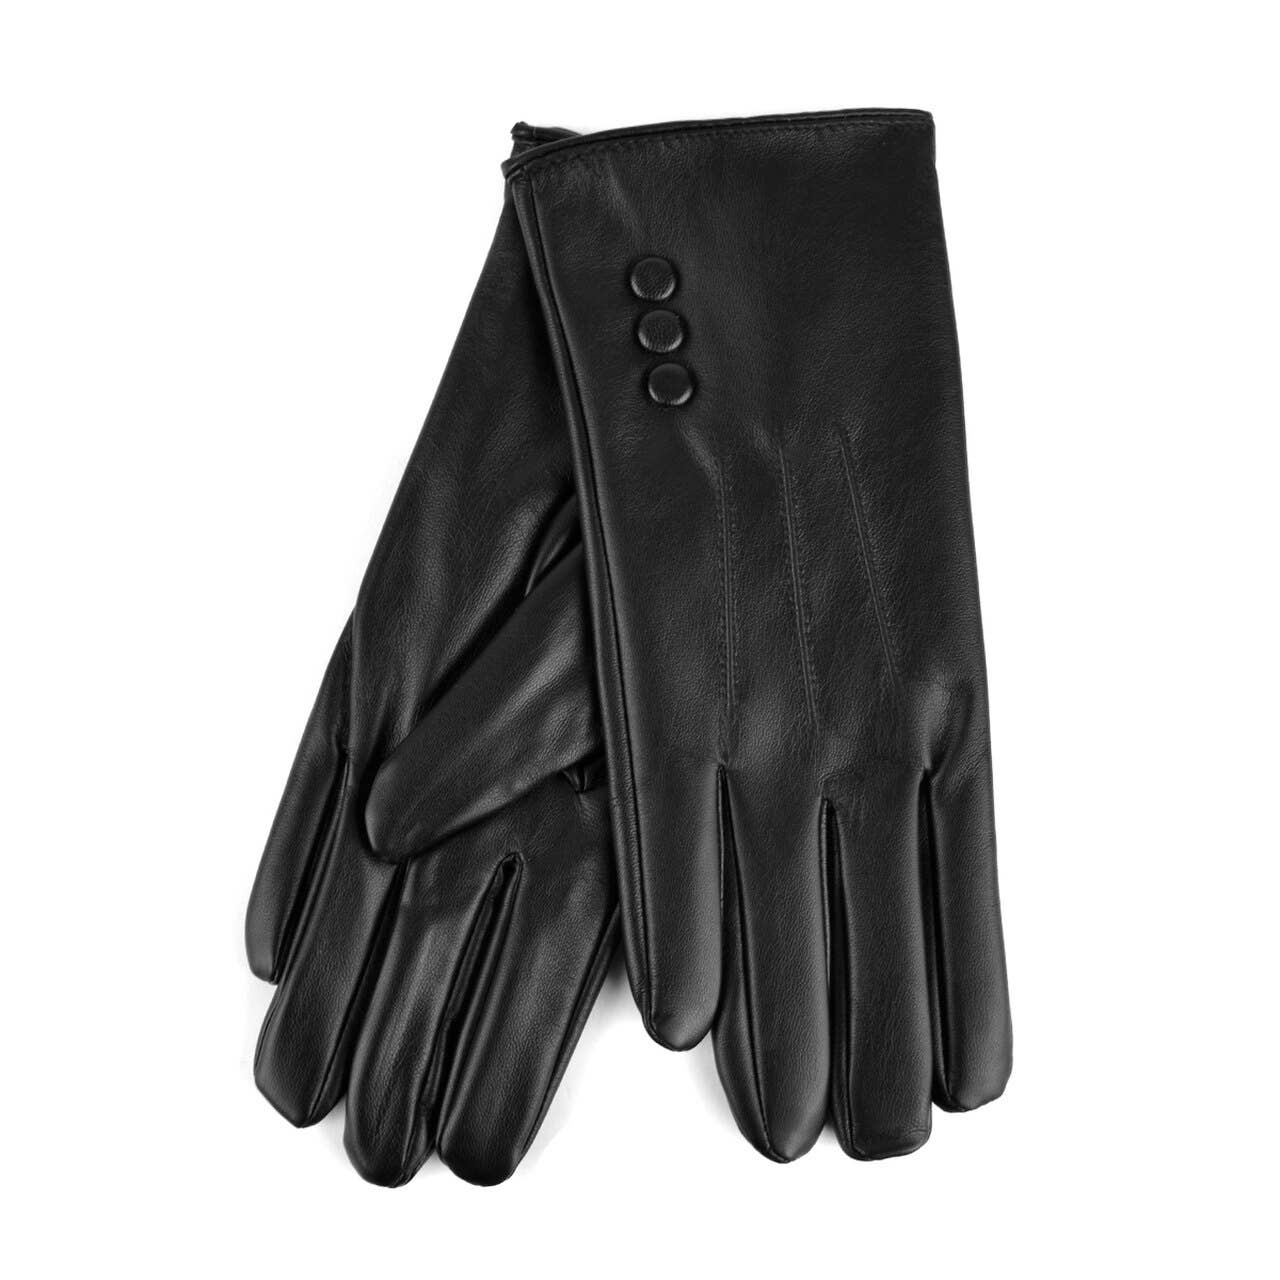 Women's PU Leather Winter Touch Screen Gloves: Brown / S/M